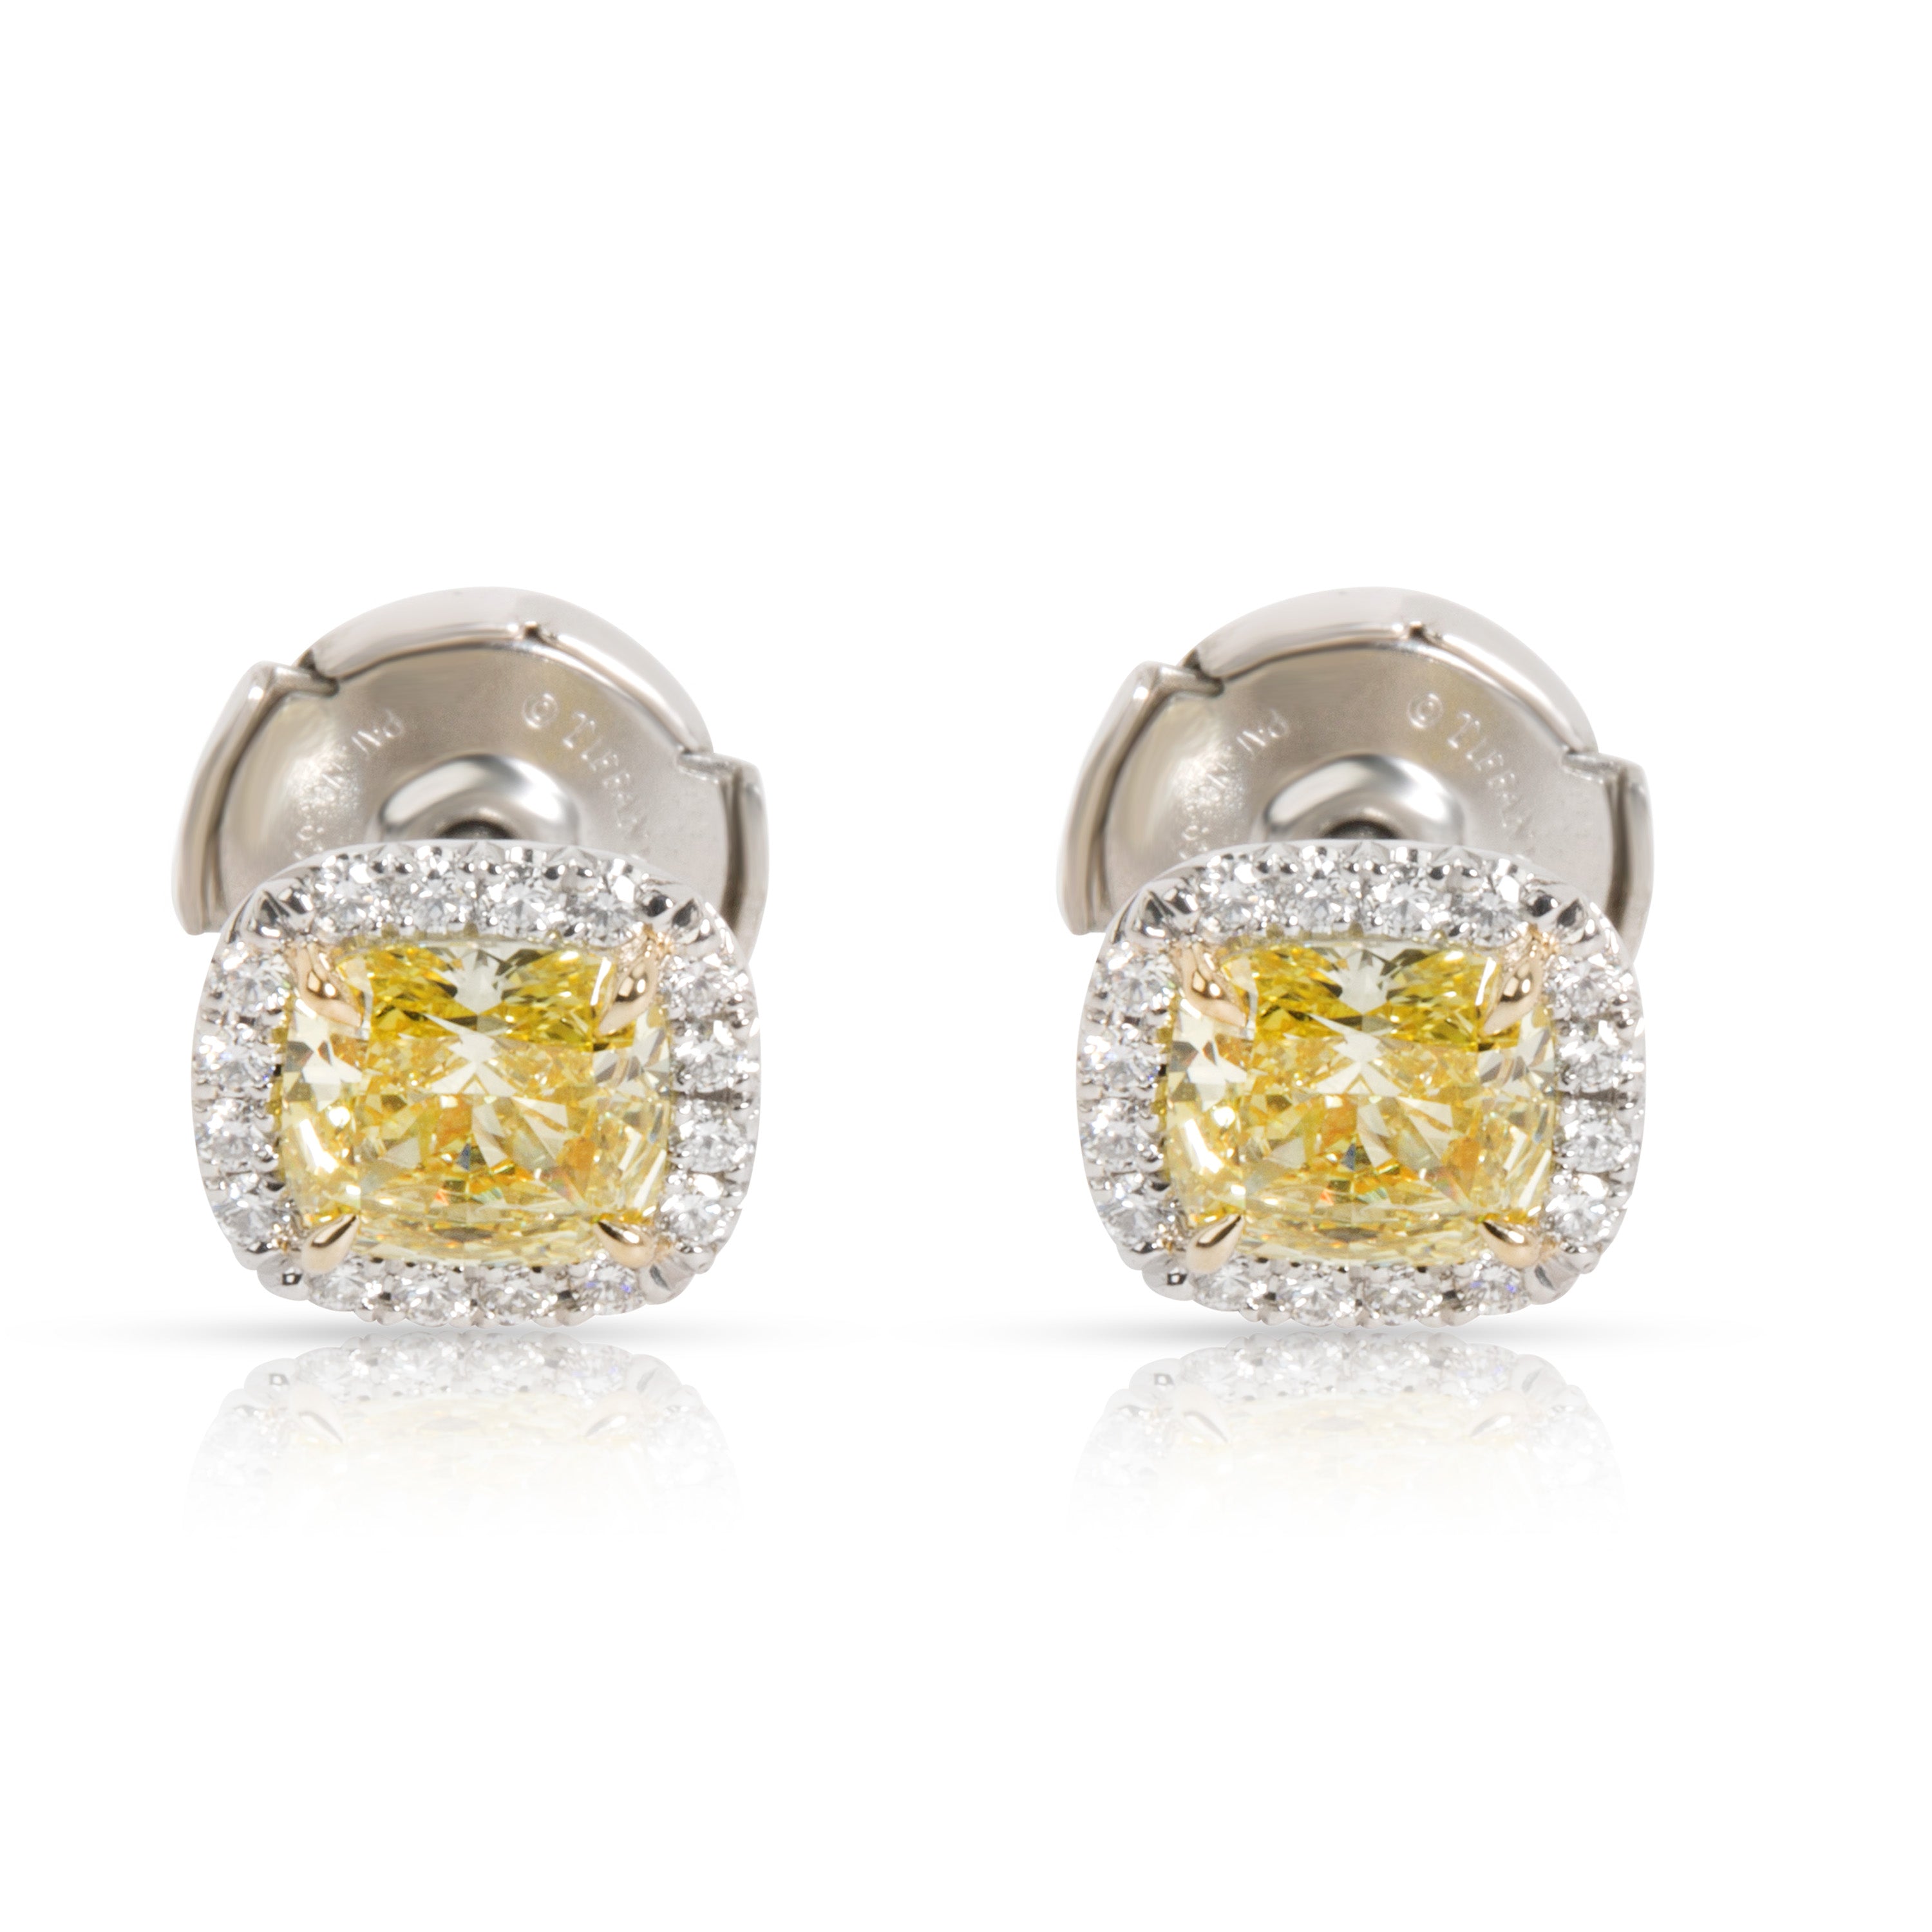 Tiffany Soleste earrings in platinum and 18k gold with yellow diamonds.